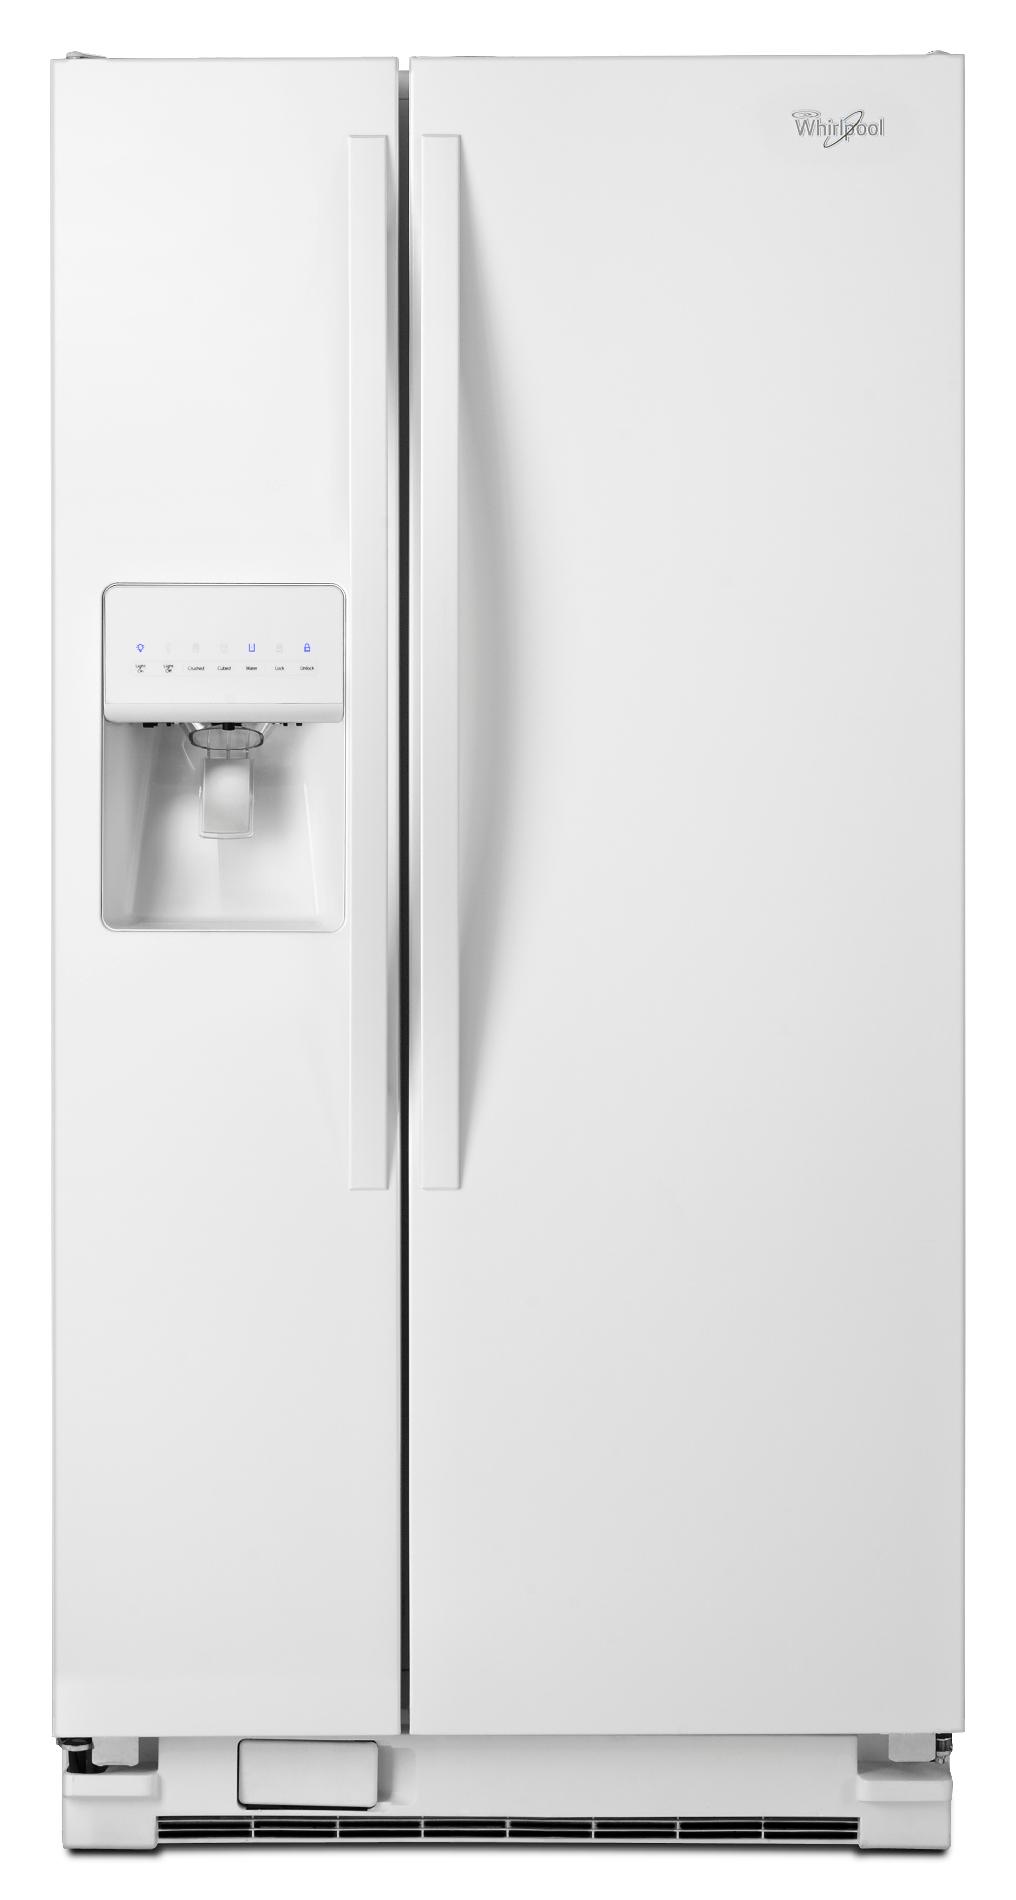 UPC 883049244525 product image for Whirlpool 21.0 cu. ft. Side by Side Refrigerator w/ Accu Chill White - 883049 | upcitemdb.com